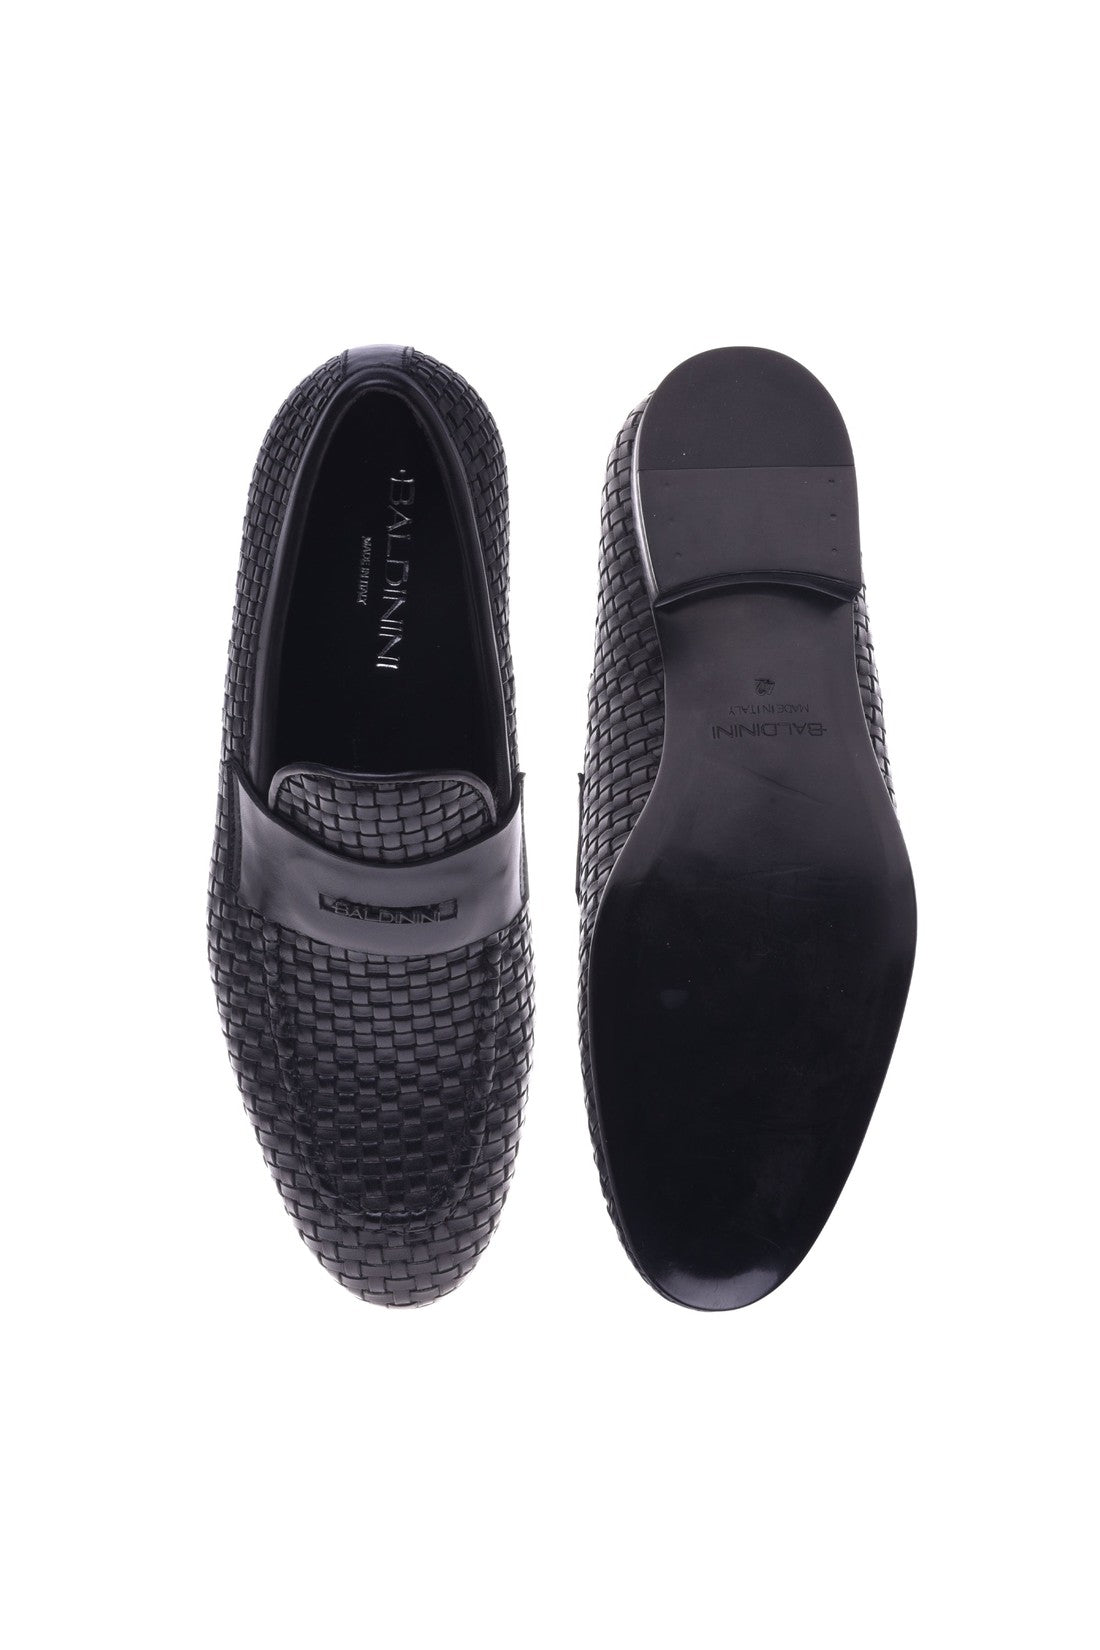 Woven leather loafer in black